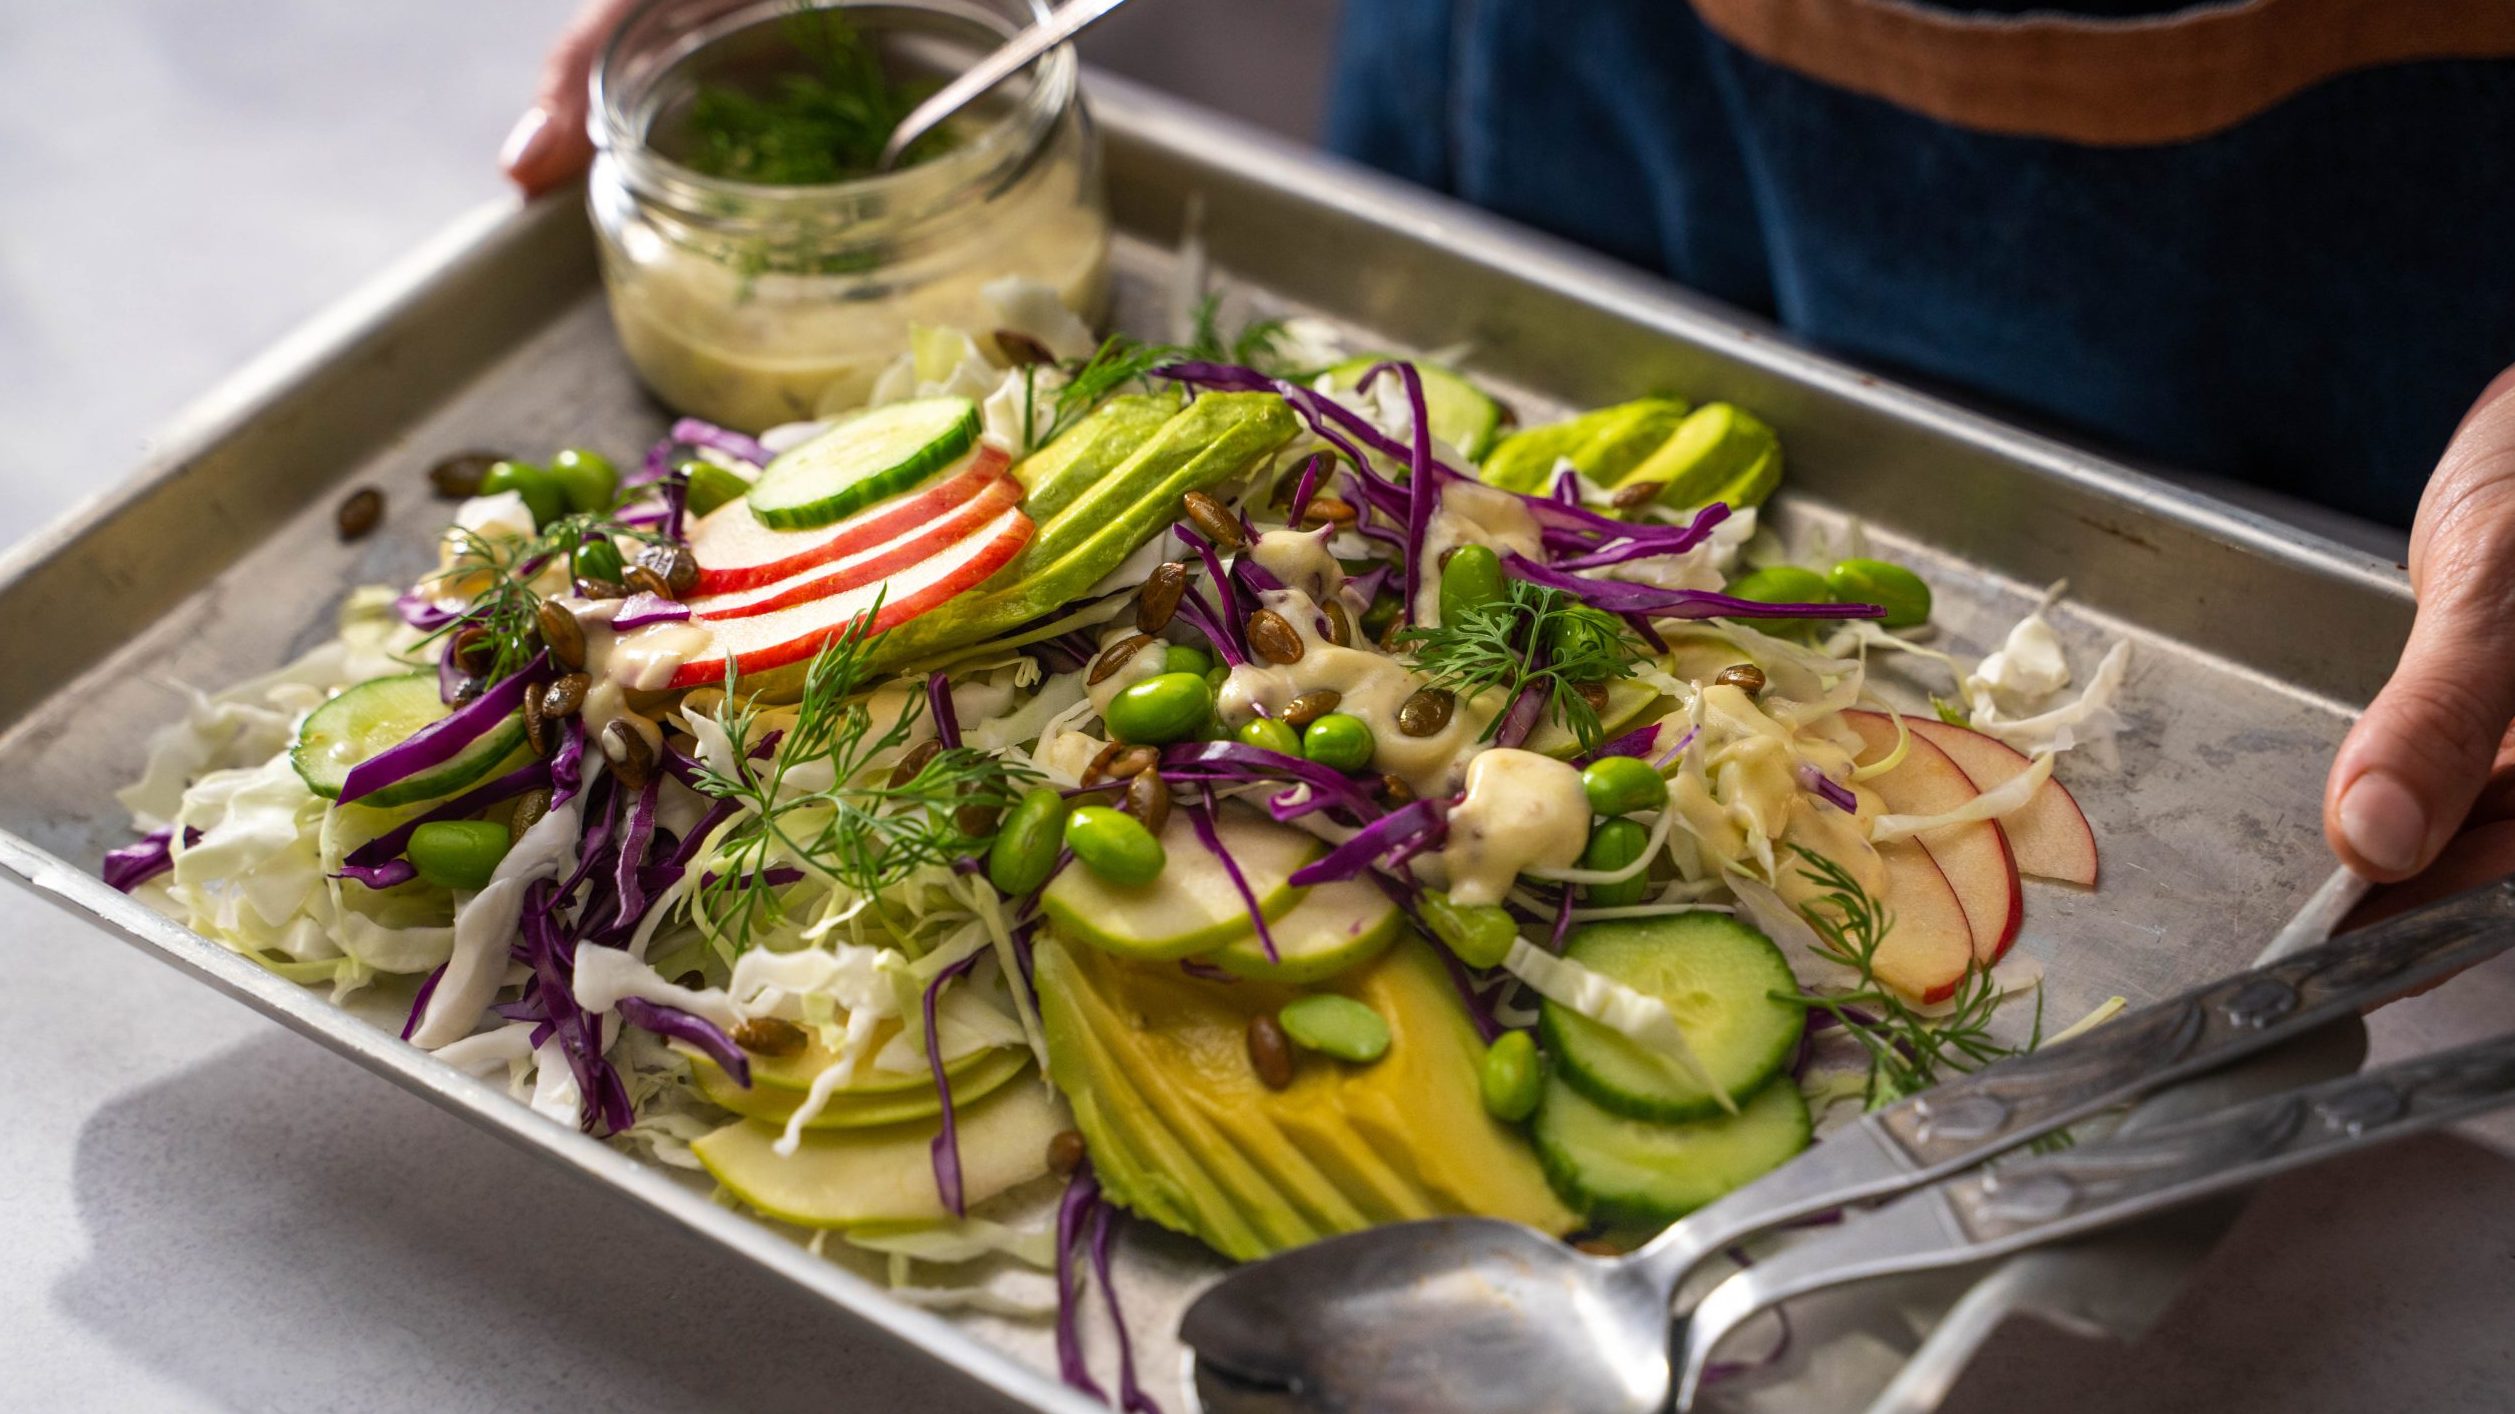 Cabbage, apple, and avocado salad with dressing on a tin tray